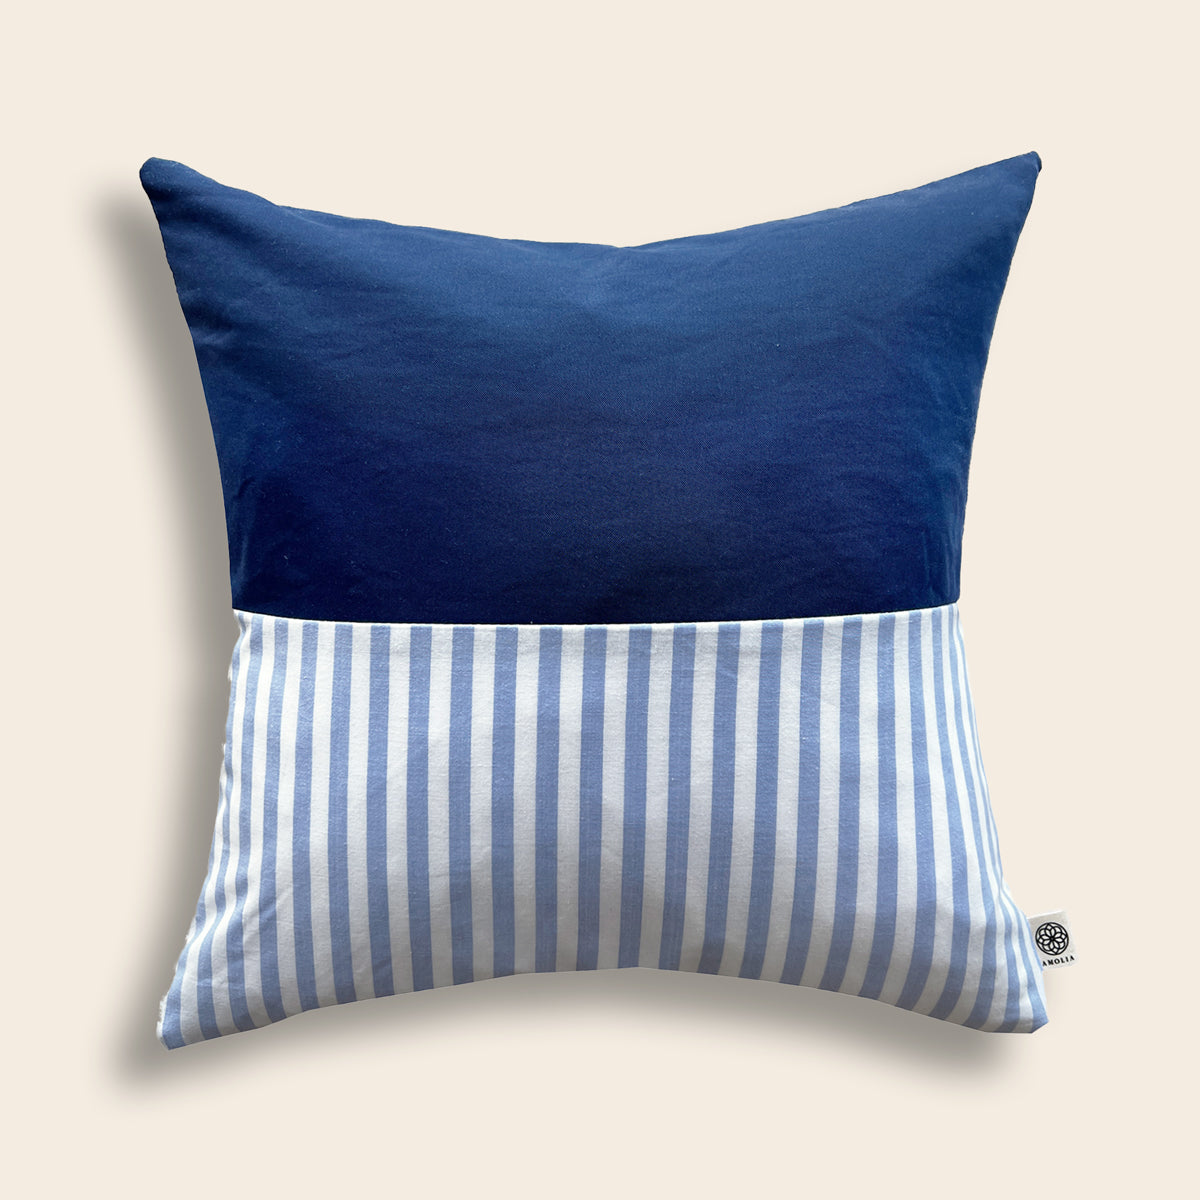 Upcycled cushion cover, 40x40cm, blue stripes